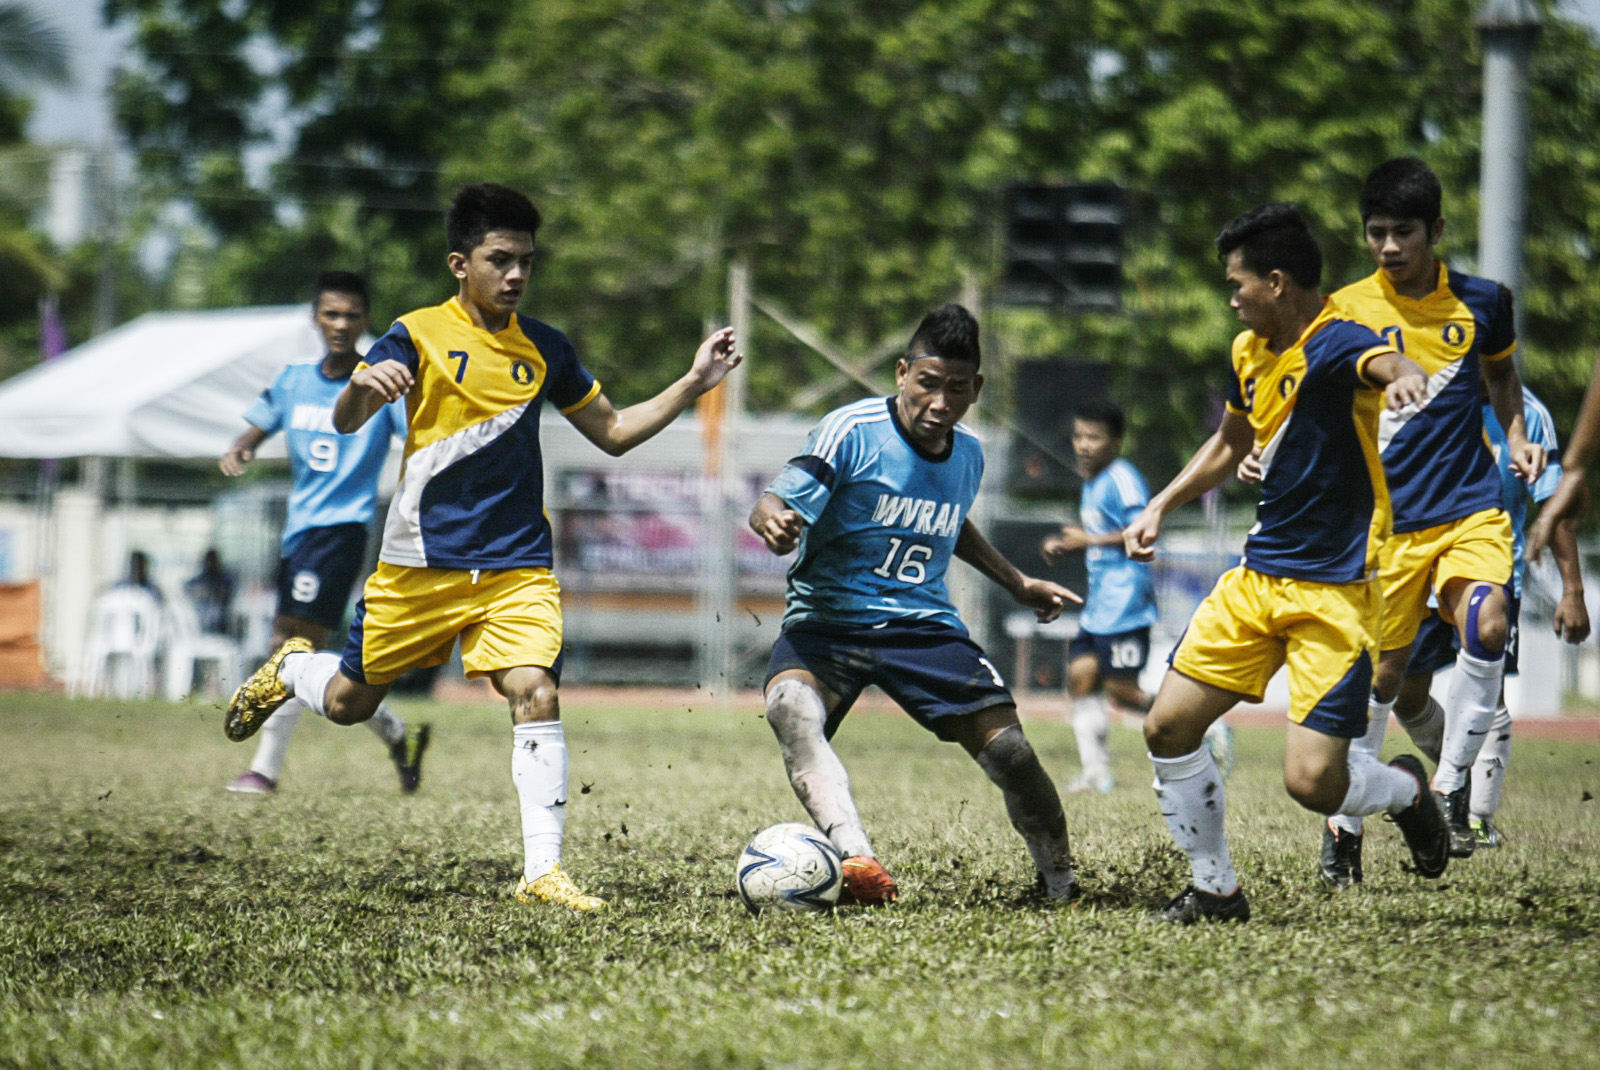 Players fight for the ball in the championship match on Saturday of the secondary football game between National Capital Region and Western Visayas Region during the Palarong Pambansa in Tagum City, Davao del Norte. Western Visayas Region captured its first ever crown in the secondary football after a shootout. Mindanews Photo by Keith Bacongco